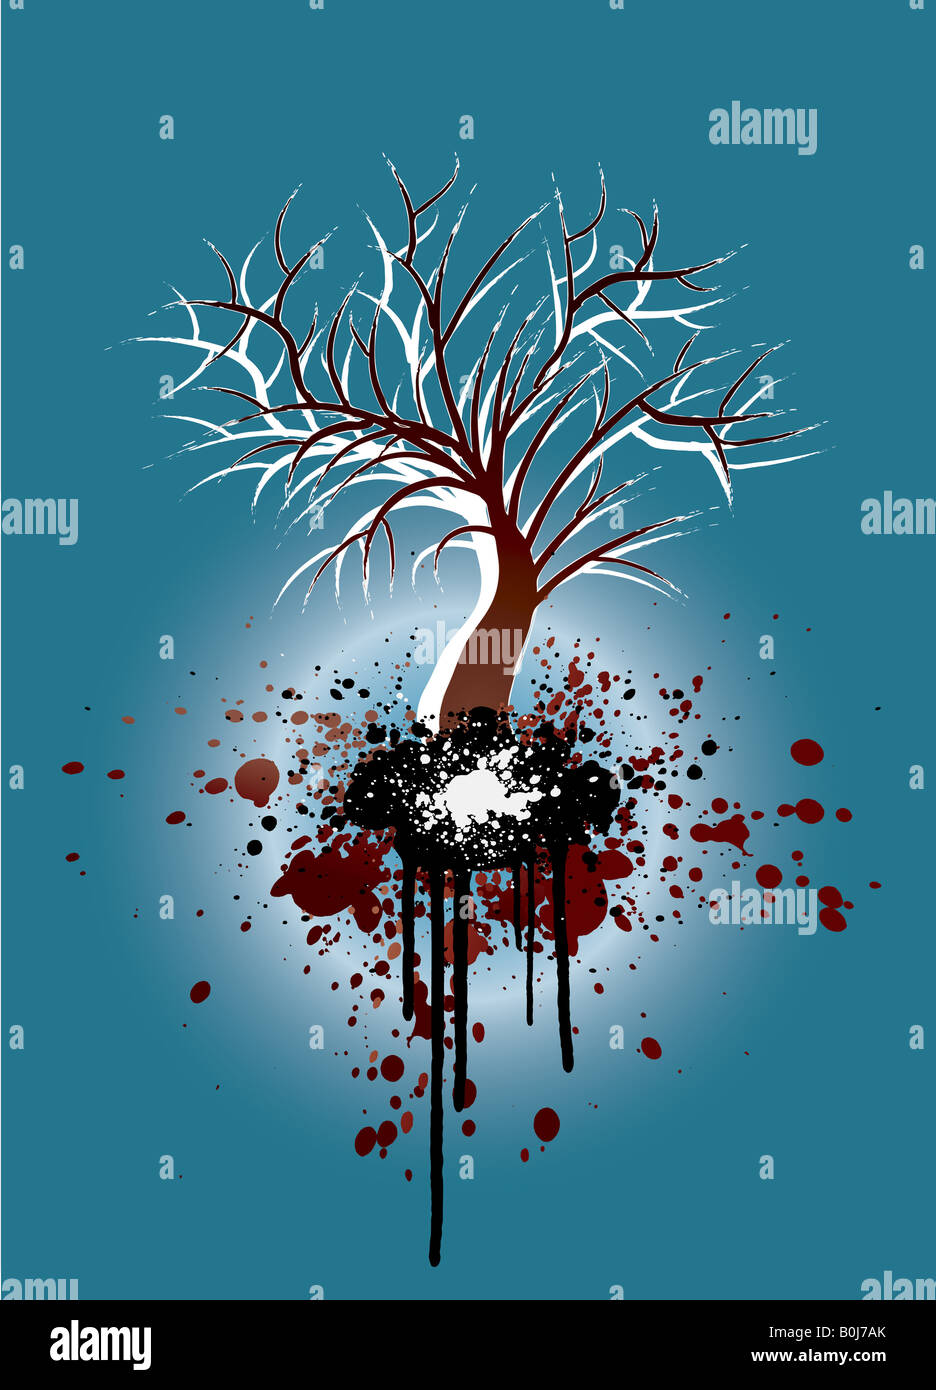 Grunge illustration of a tree silhouette with gradient colors on a winter or autumn theme Stock Photo